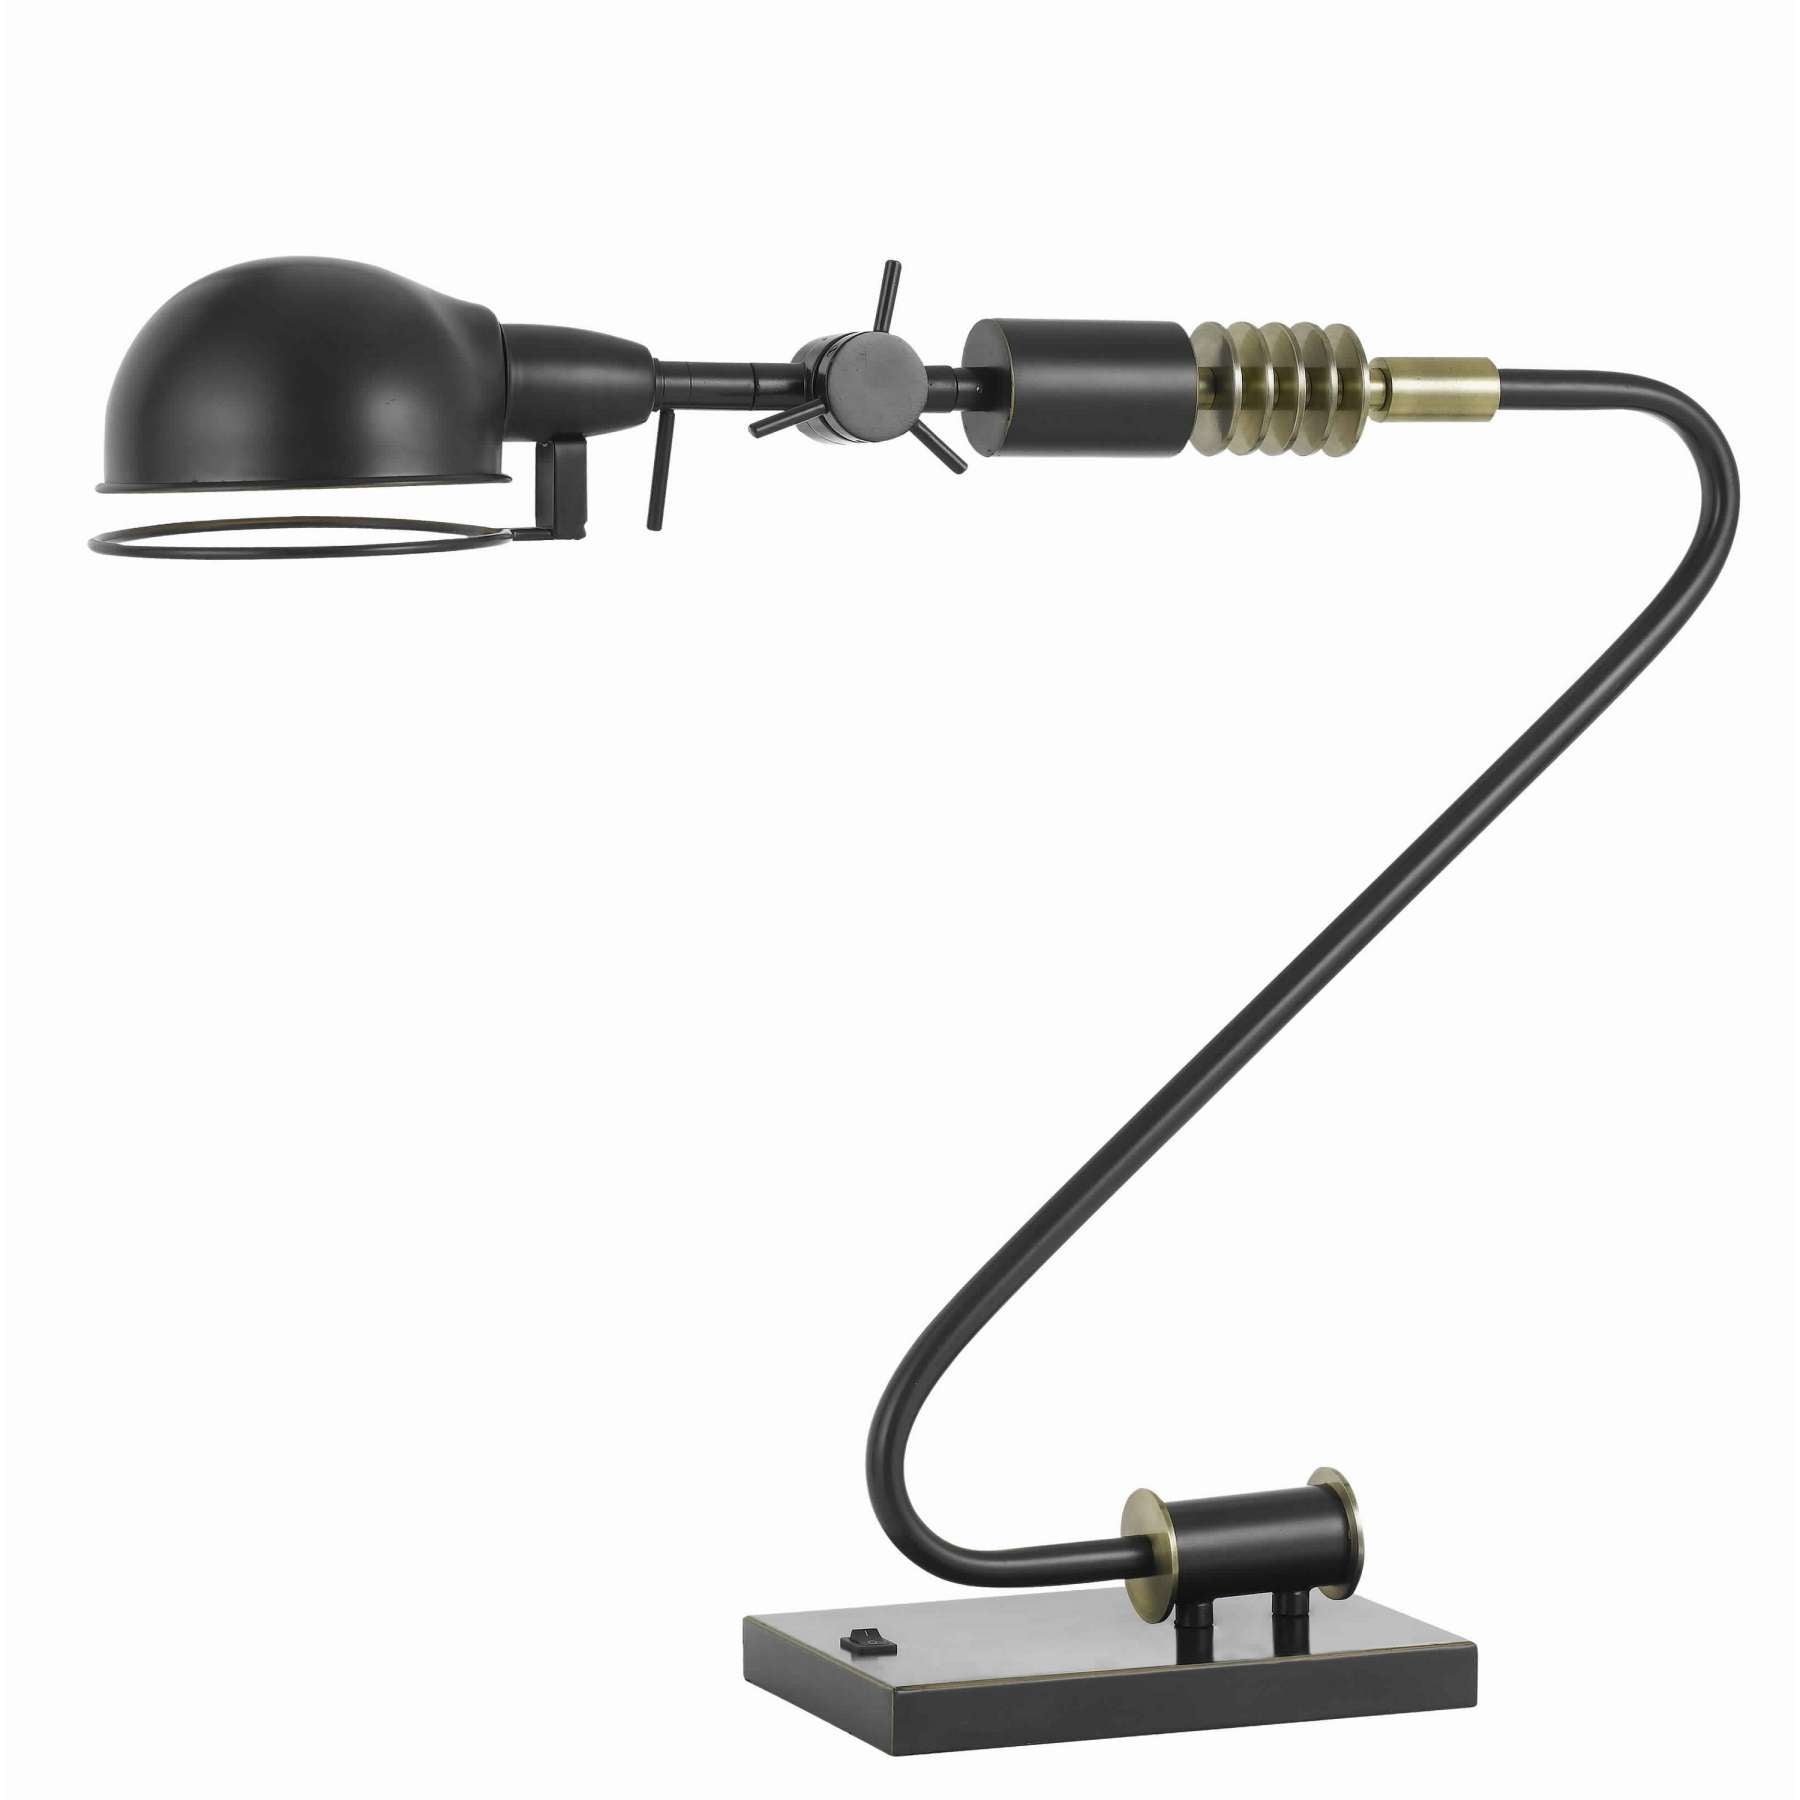 Adjustable Head Metal Desk Lamp With Curved Design Tubular Stand, Black By Benzara